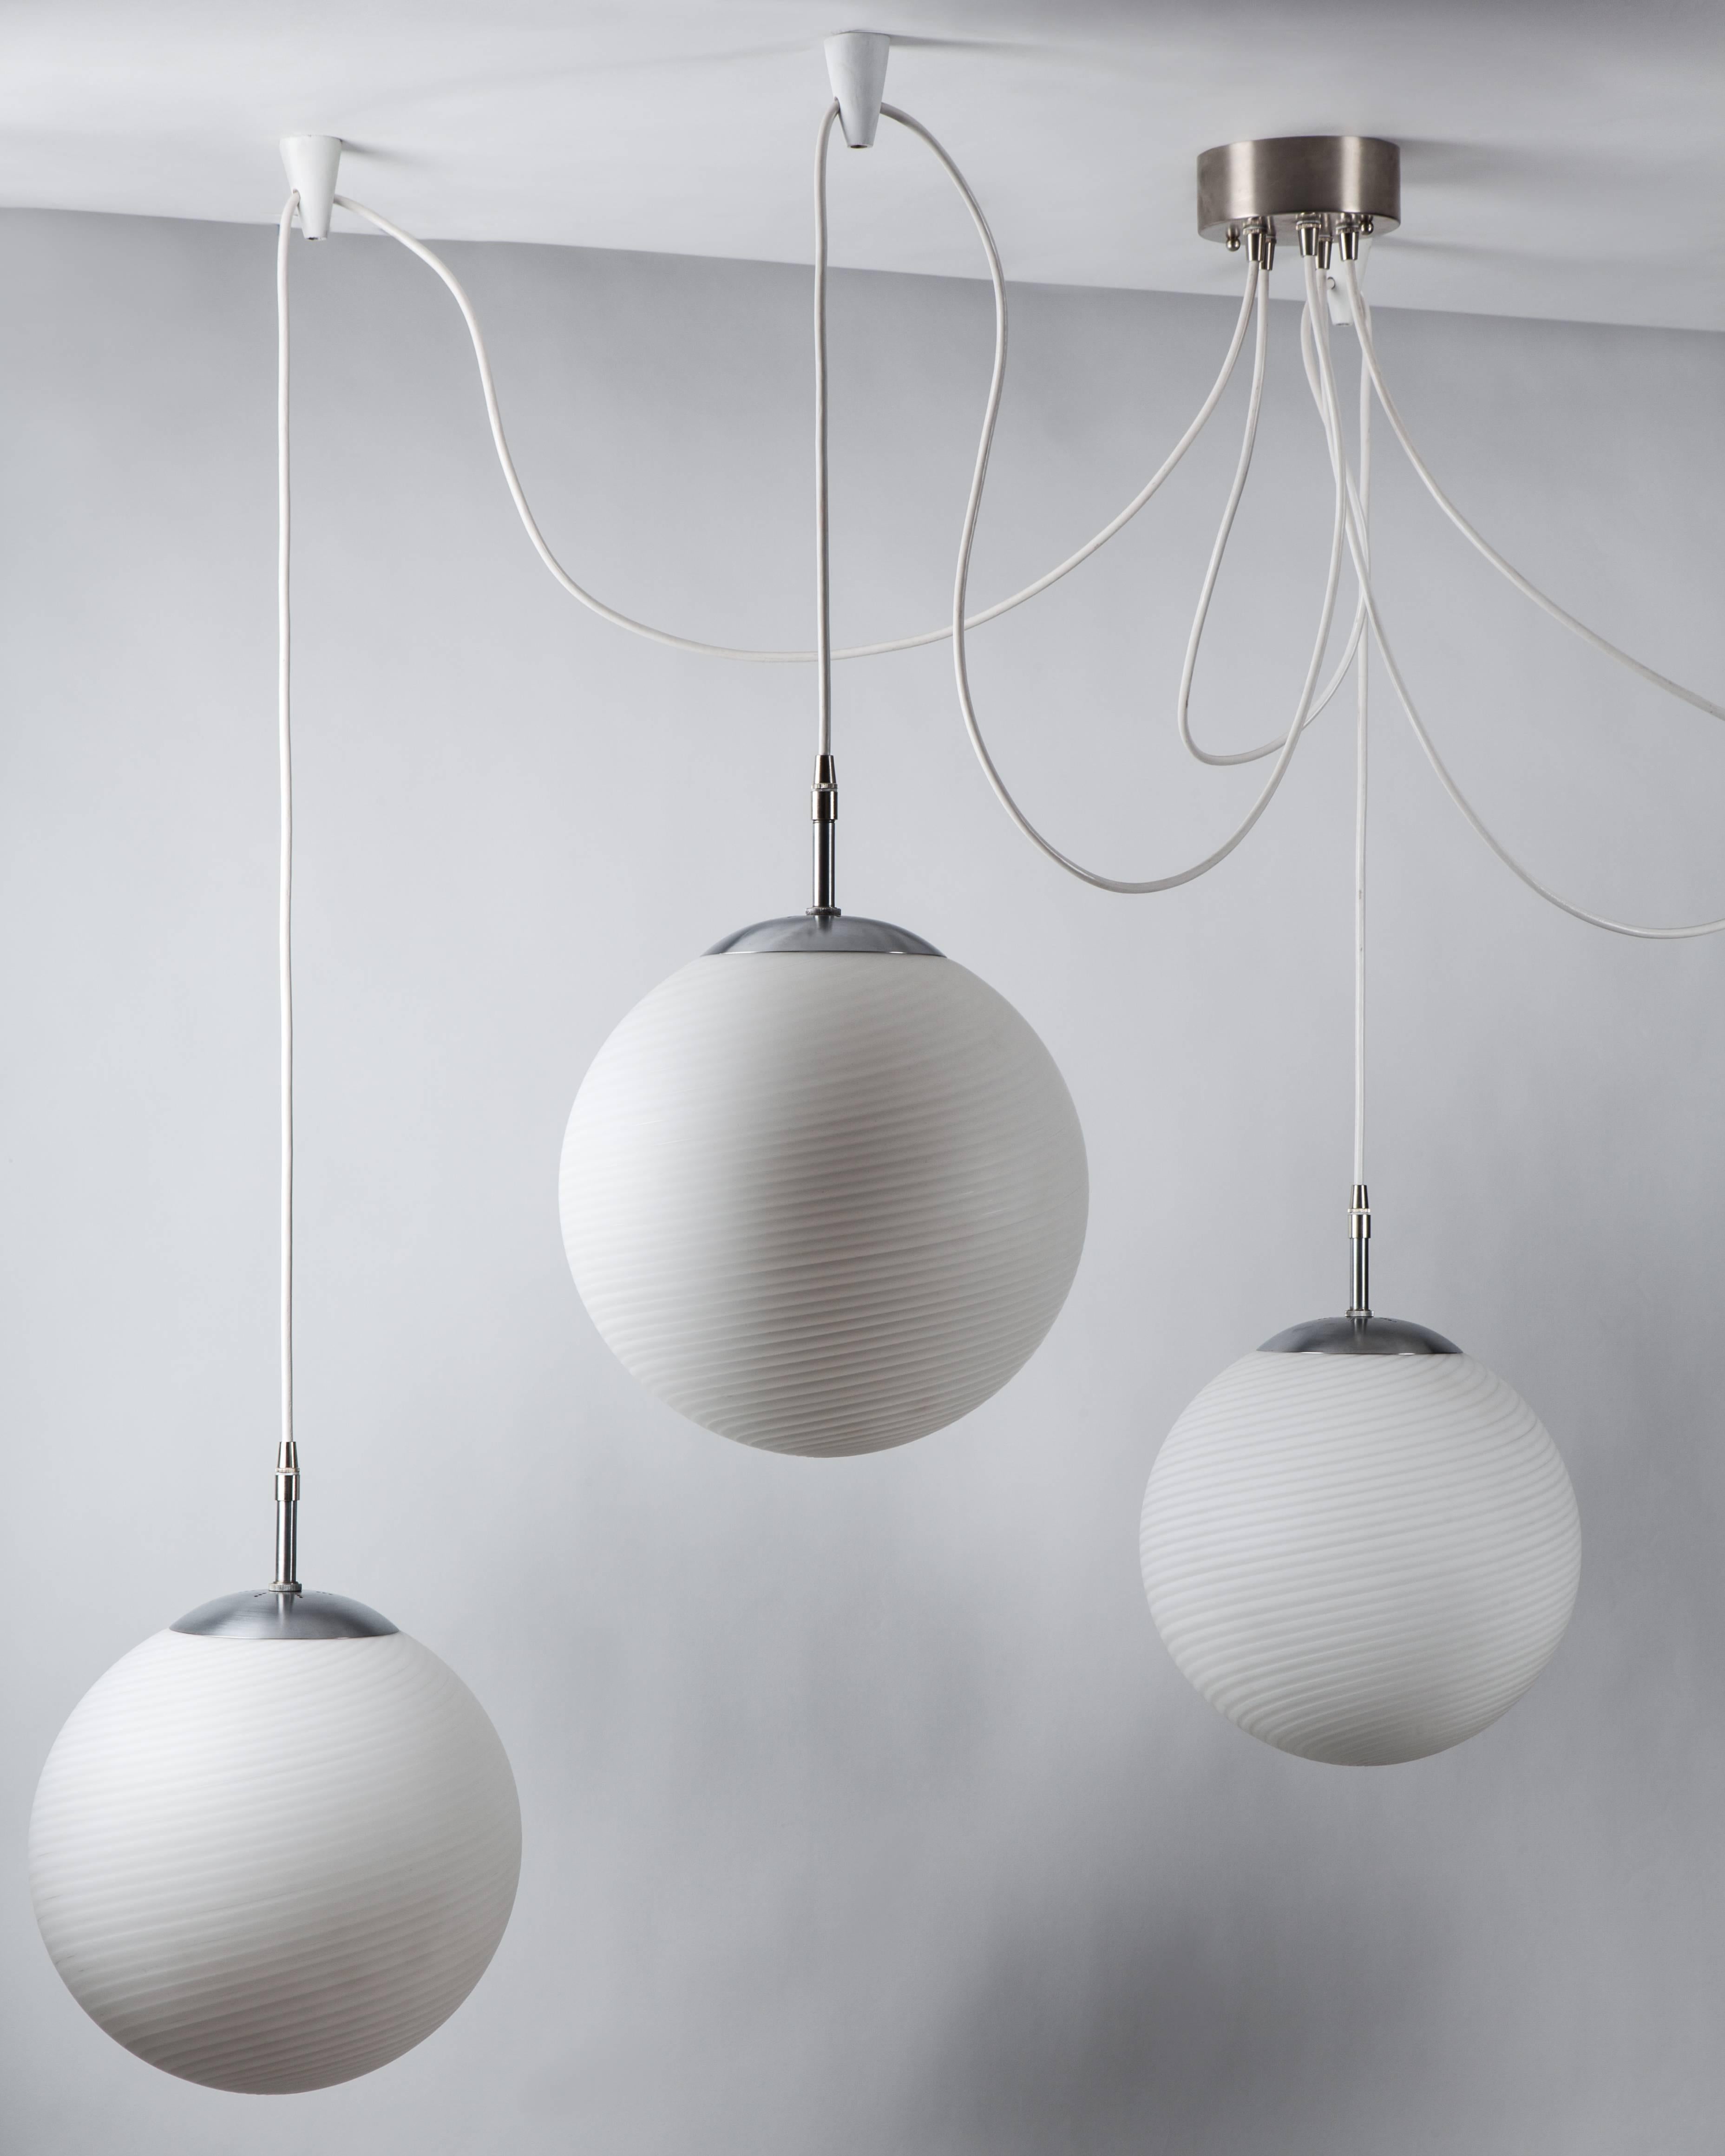 AHL3906.
A five-light fixture of swirled glass globes suspended from white enameled wooden anchors. Having satined aluminum and nickel metalwork, the fitters are marked with German export stamps; the wood pieces marked 